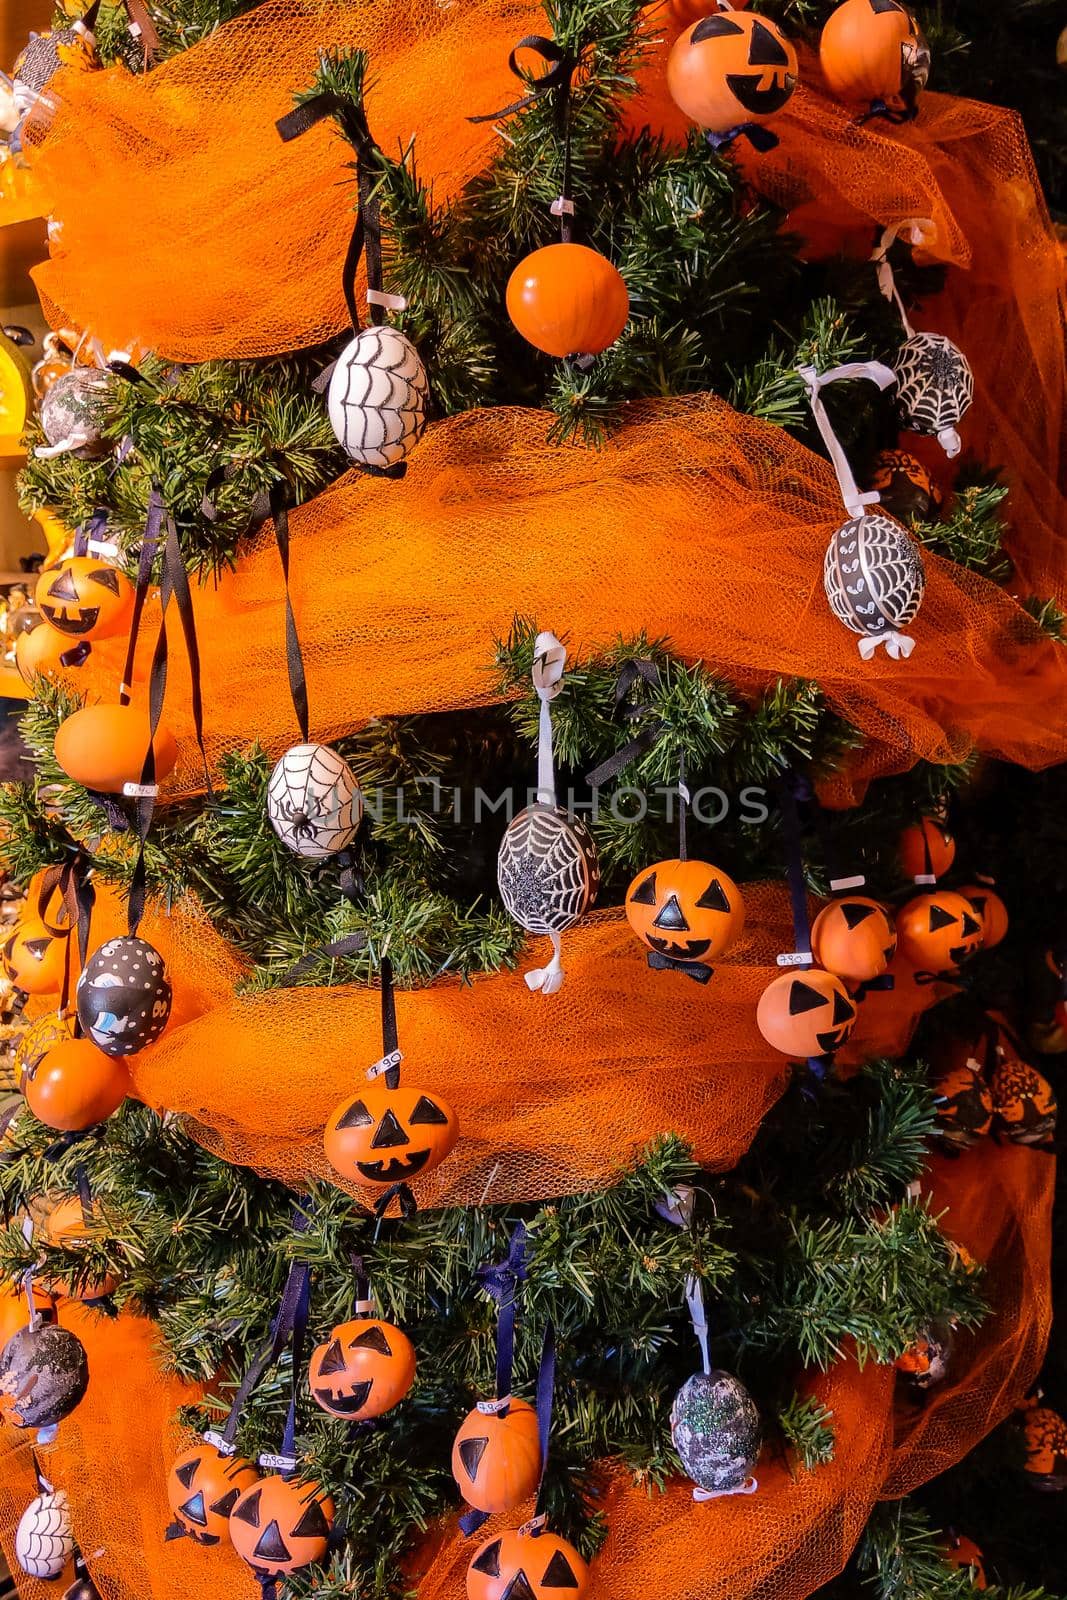 The green Christmas tree is beautifully decorated with toys. Halloween